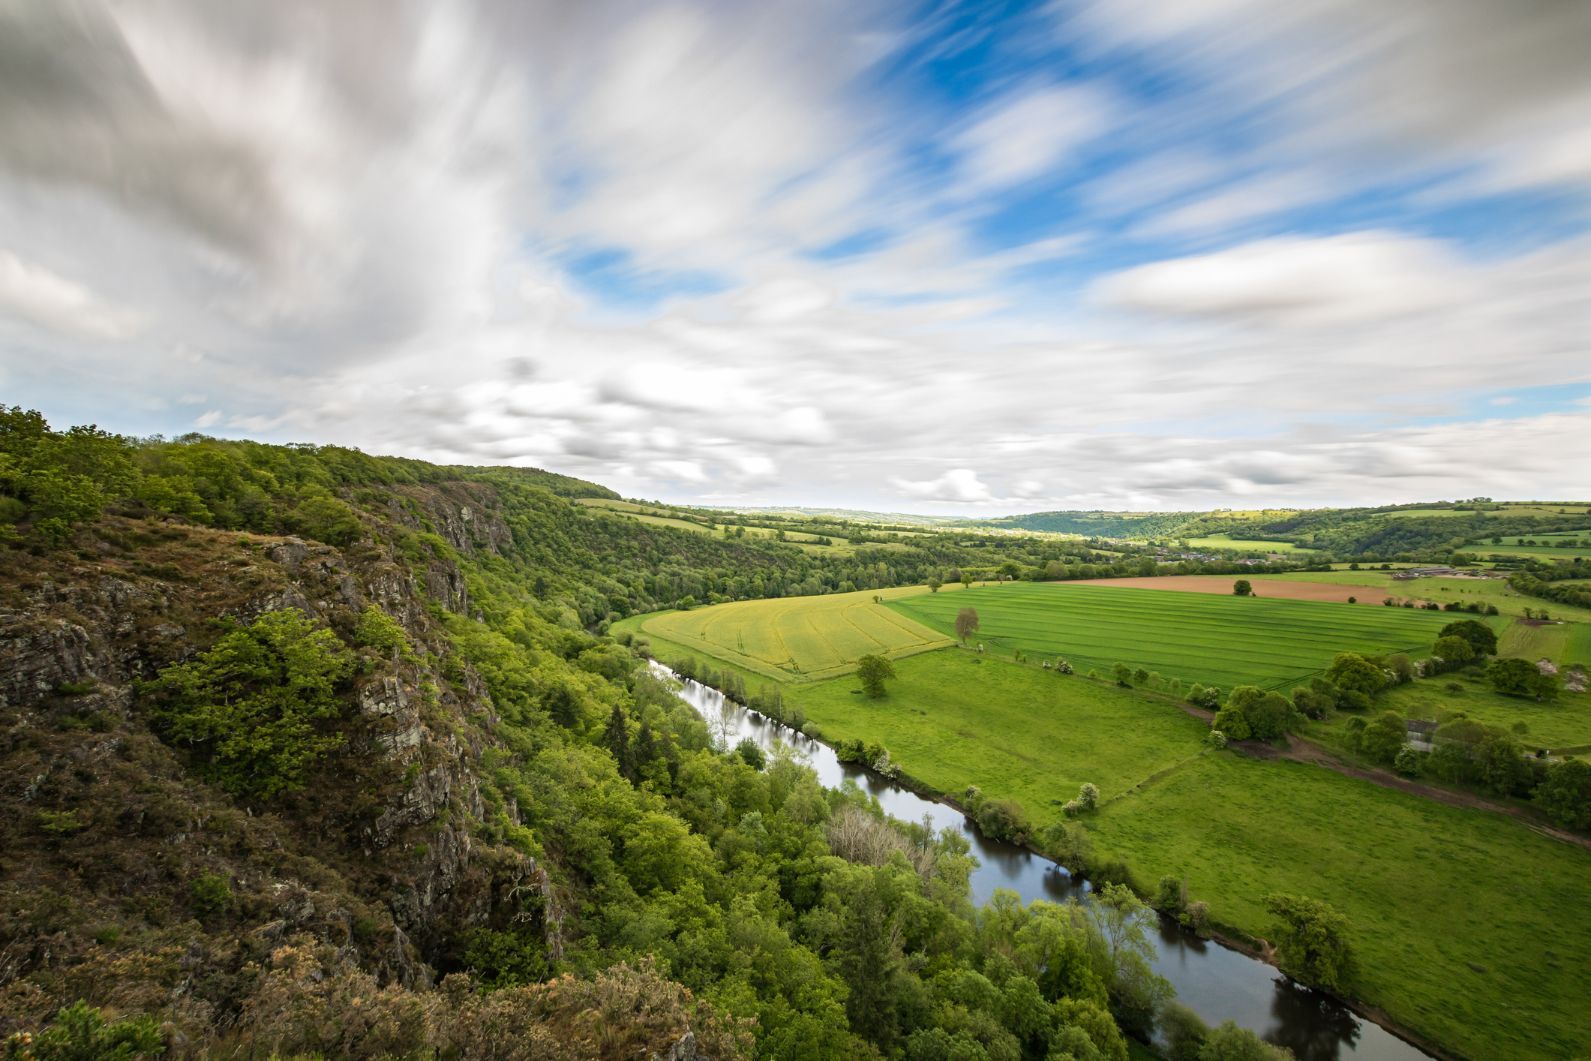 The landscape from the top of Rochers des Parcs on the edge of the Orne River, Northern France.